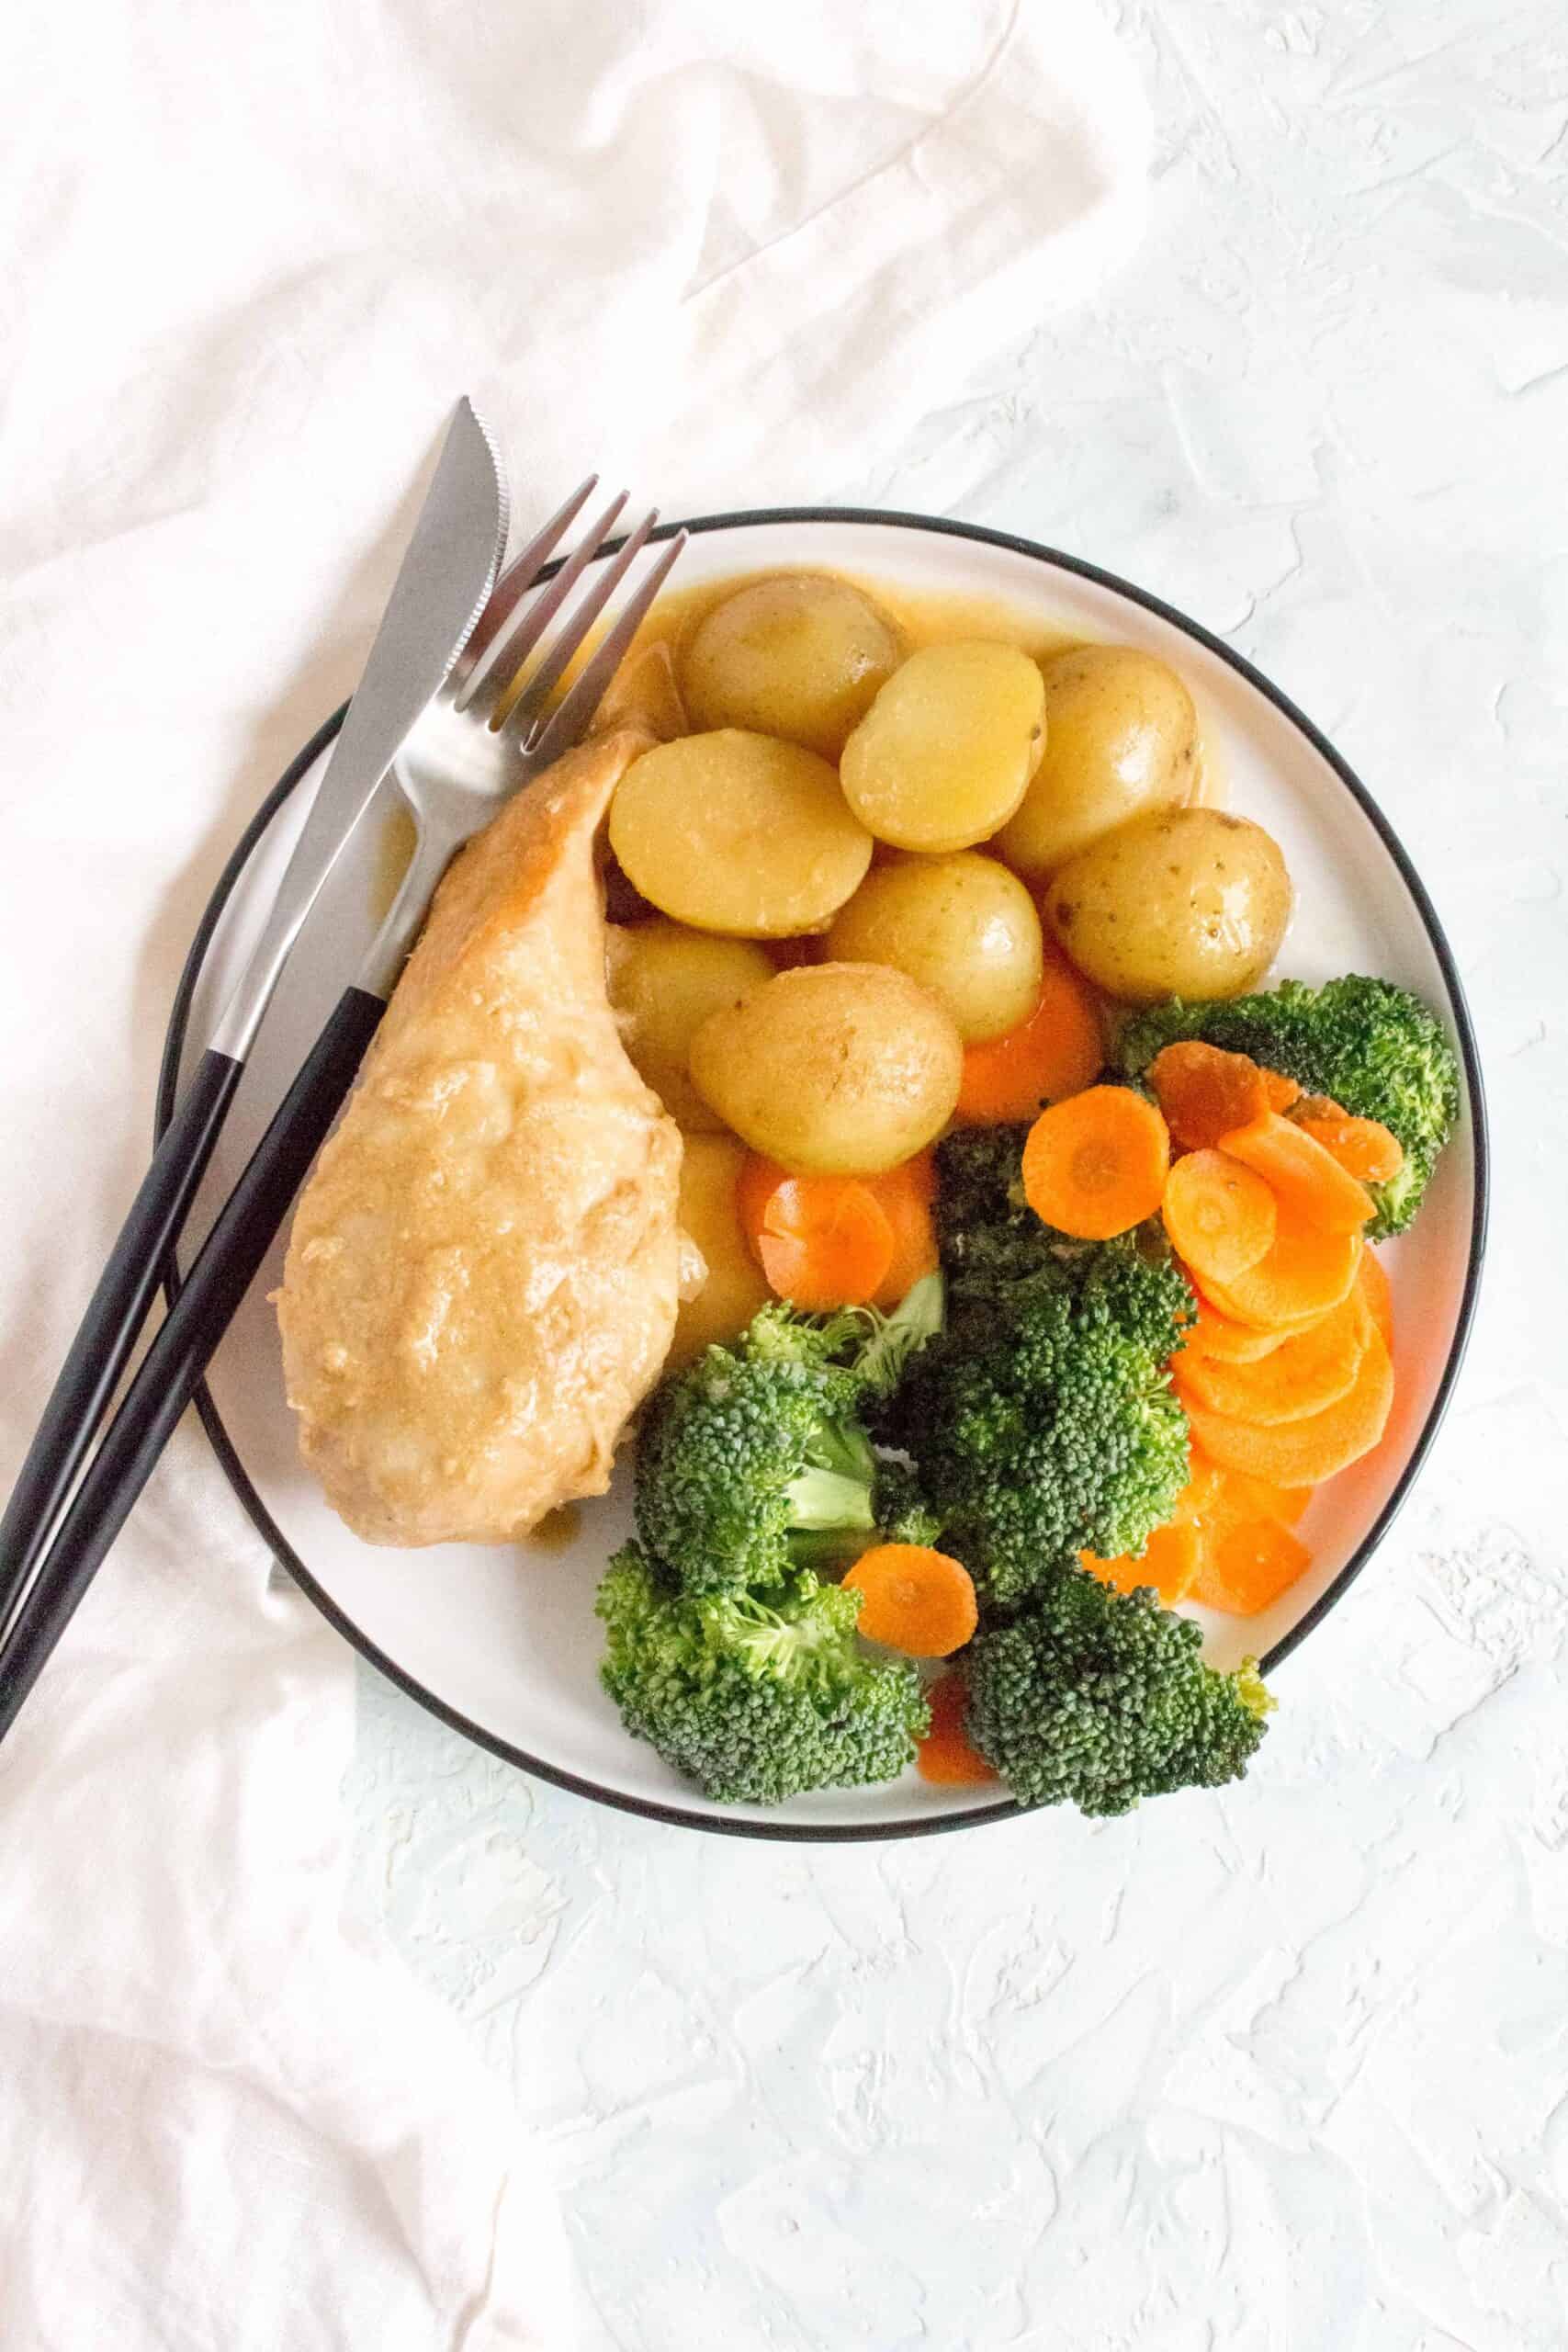 This Honey Mustard Chicken, Potatoes, and Vegetables is all made in one pot, the Instant Pot! Juicy, full of flavour, and simple to make, this Instant Pot chicken recipe will make dinner (and meal prep) a breeze!